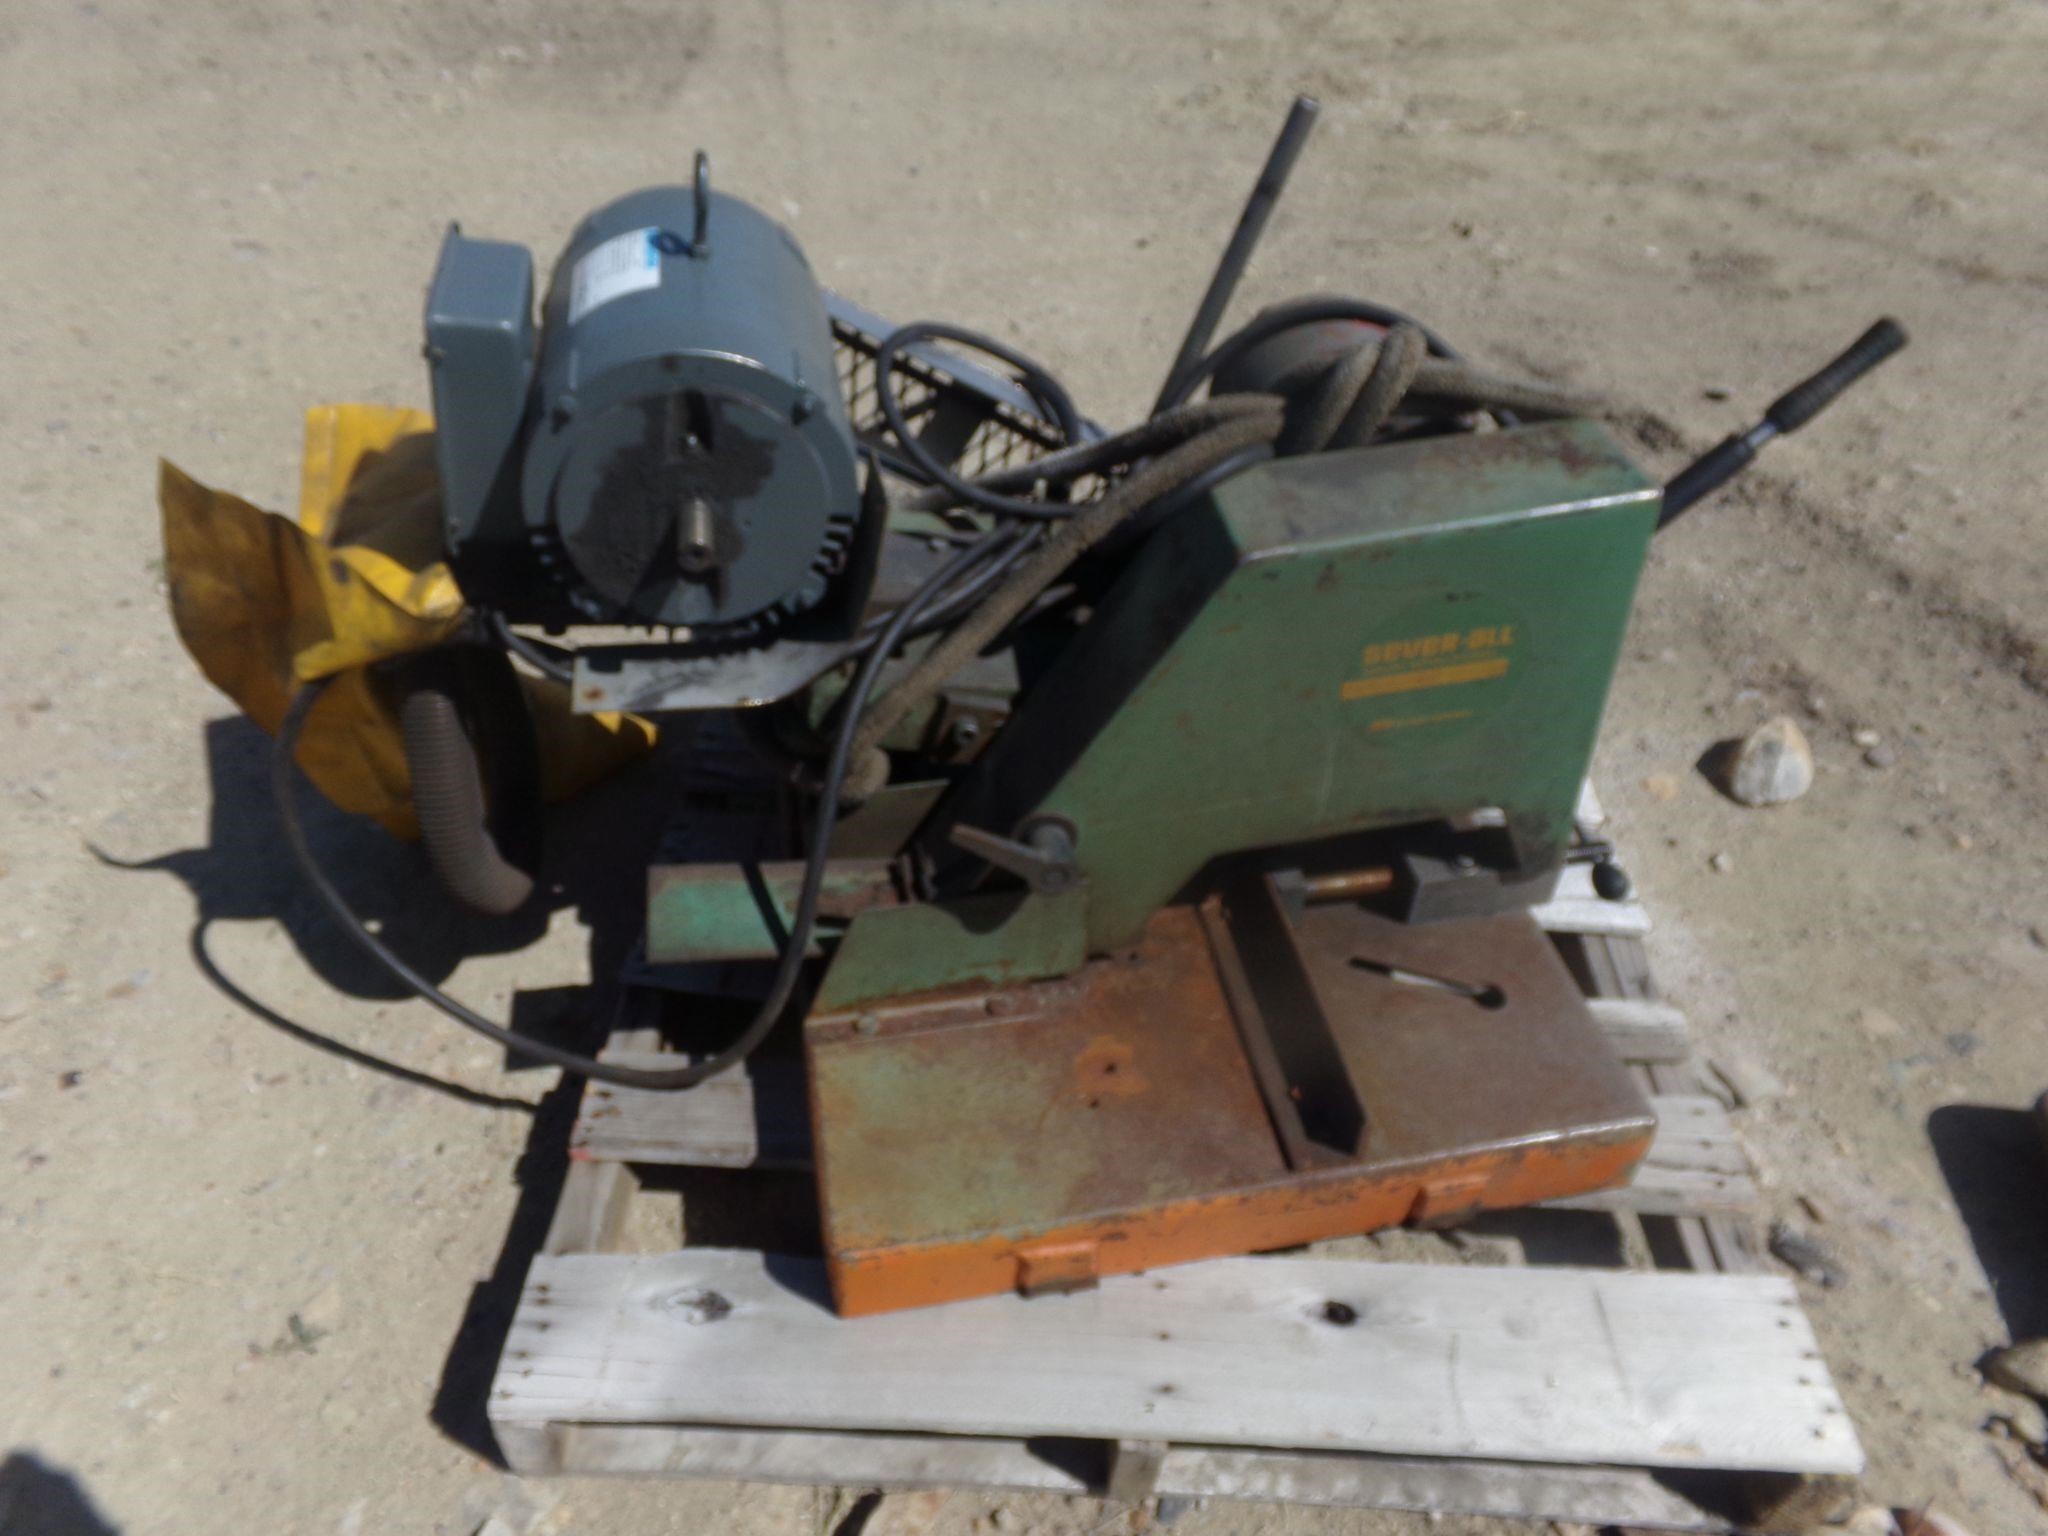 Large commercial chop saw